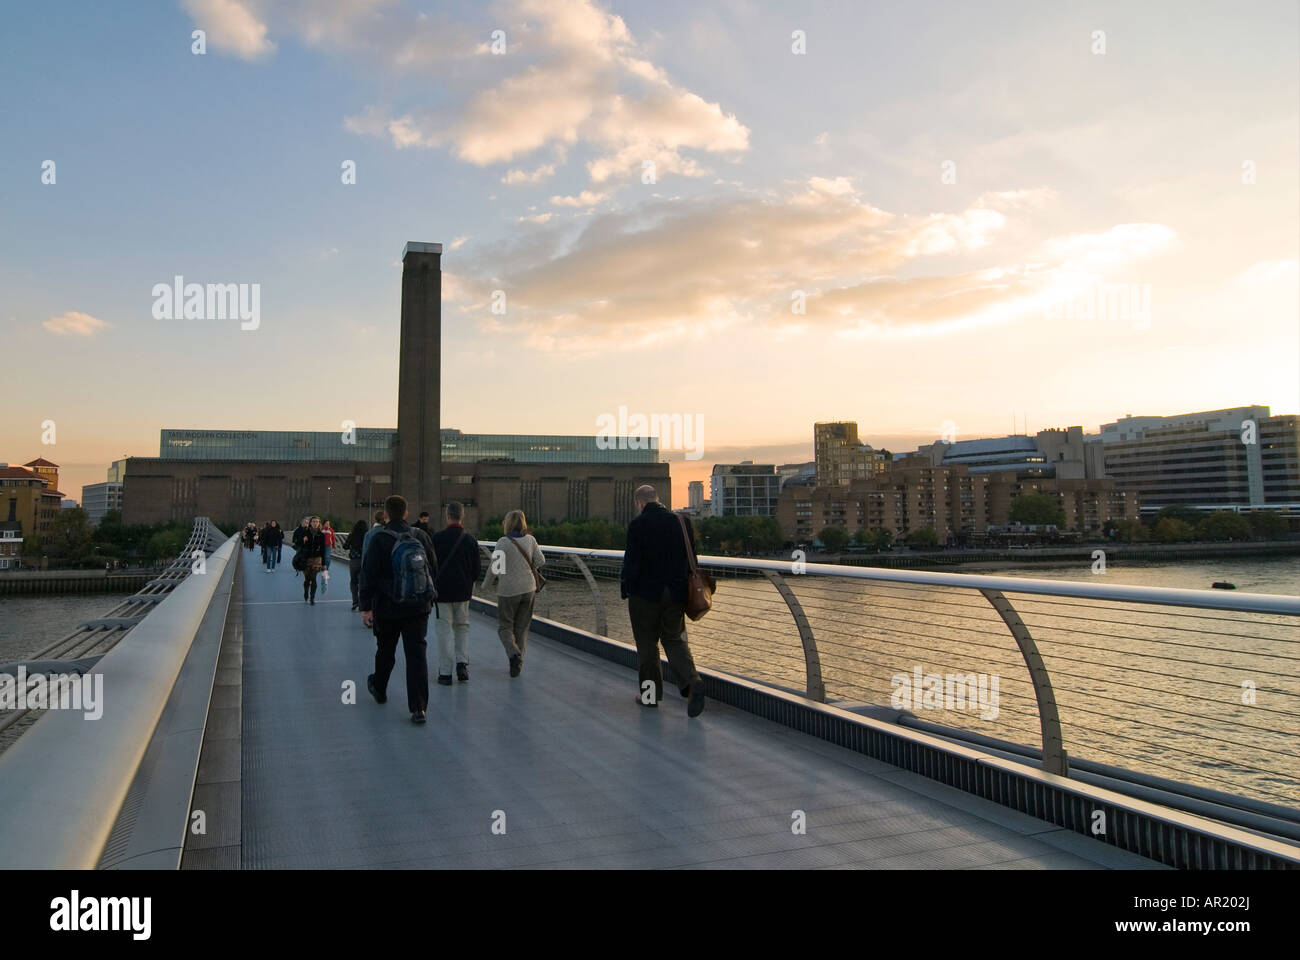 Horizontal wide angle of the Tate Modern museum and the Millennium Bridge crossing the river Thames at sunset. Stock Photo